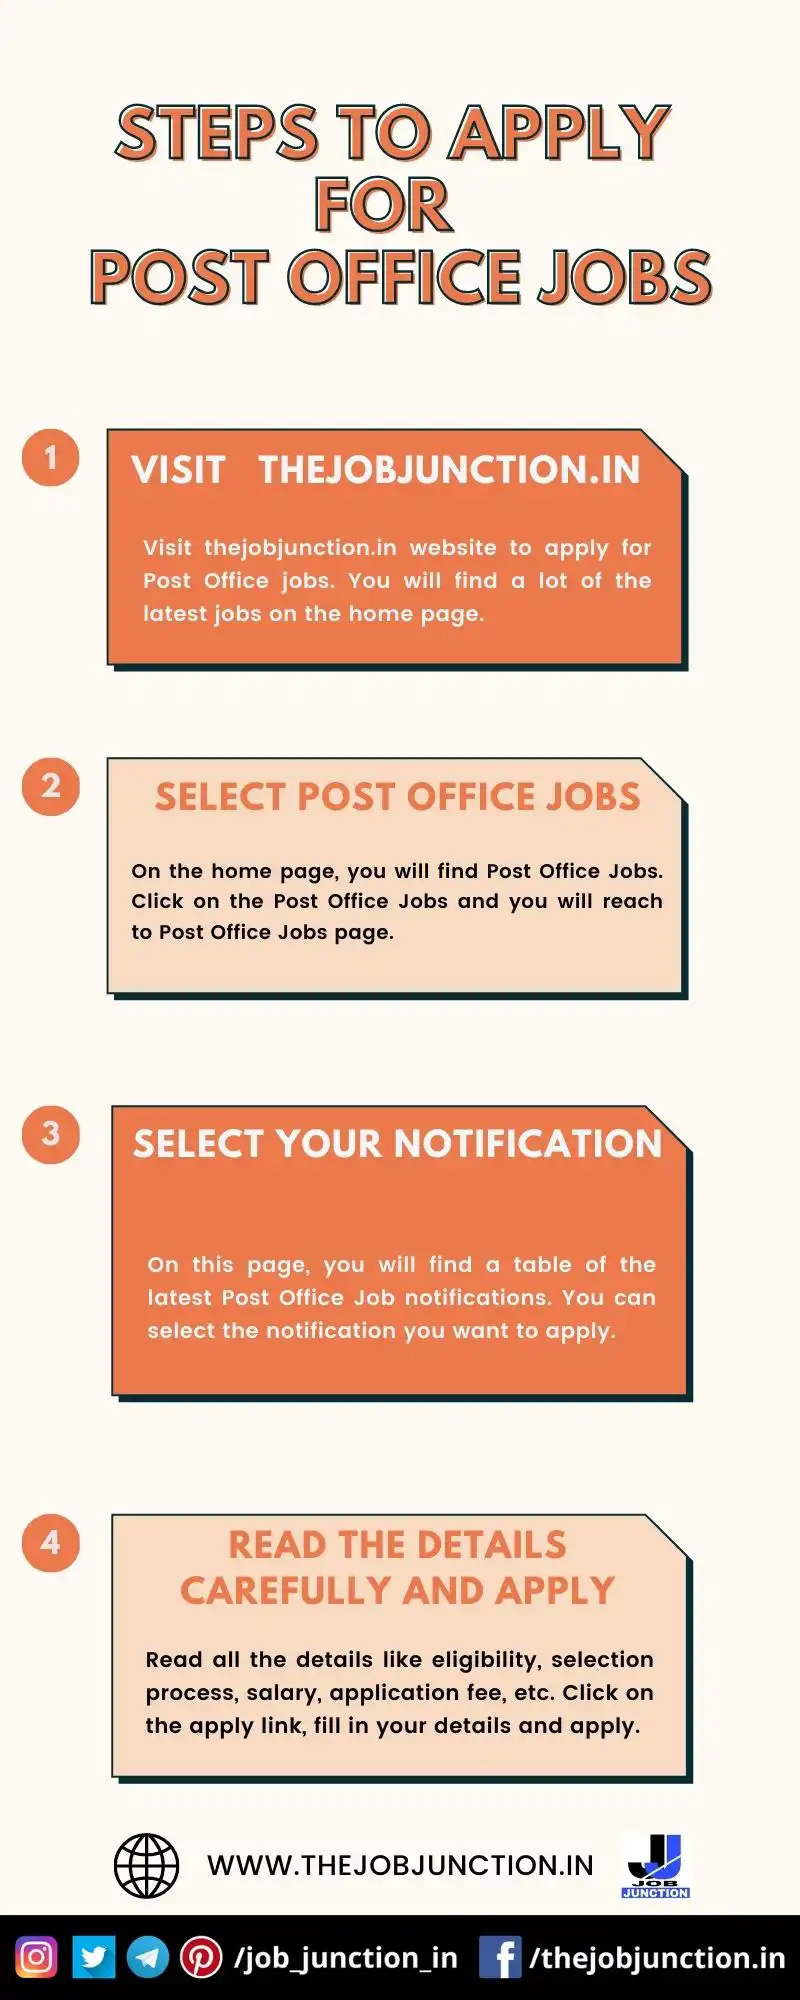 STEPS TO APPLY FOR POST OFFICE JOBS